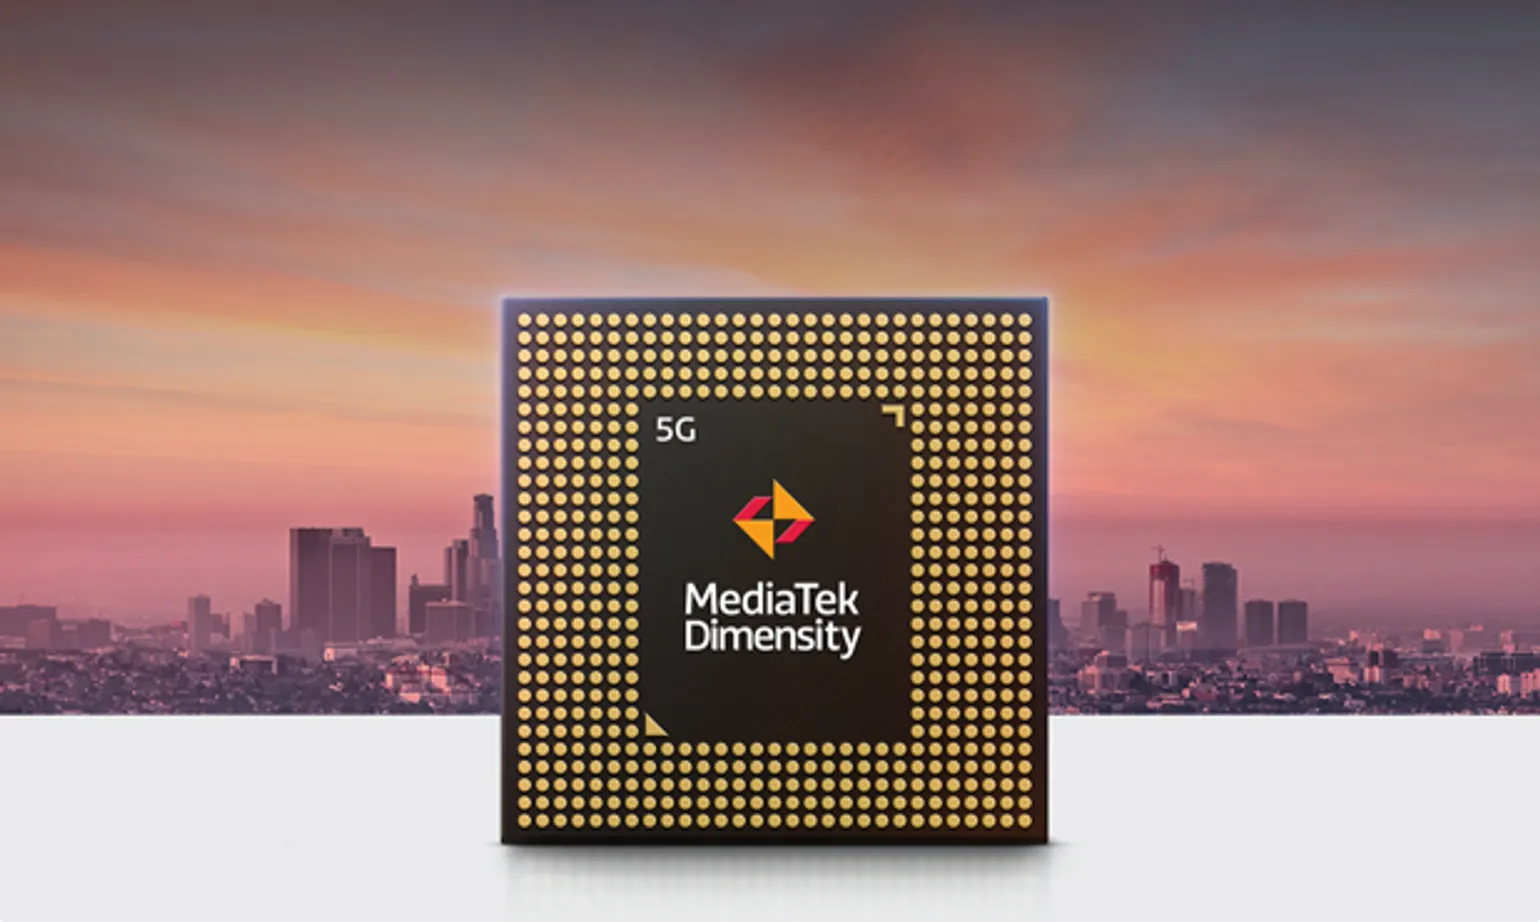 Samsung Galaxy S23 is expected to use a MediaTek chip